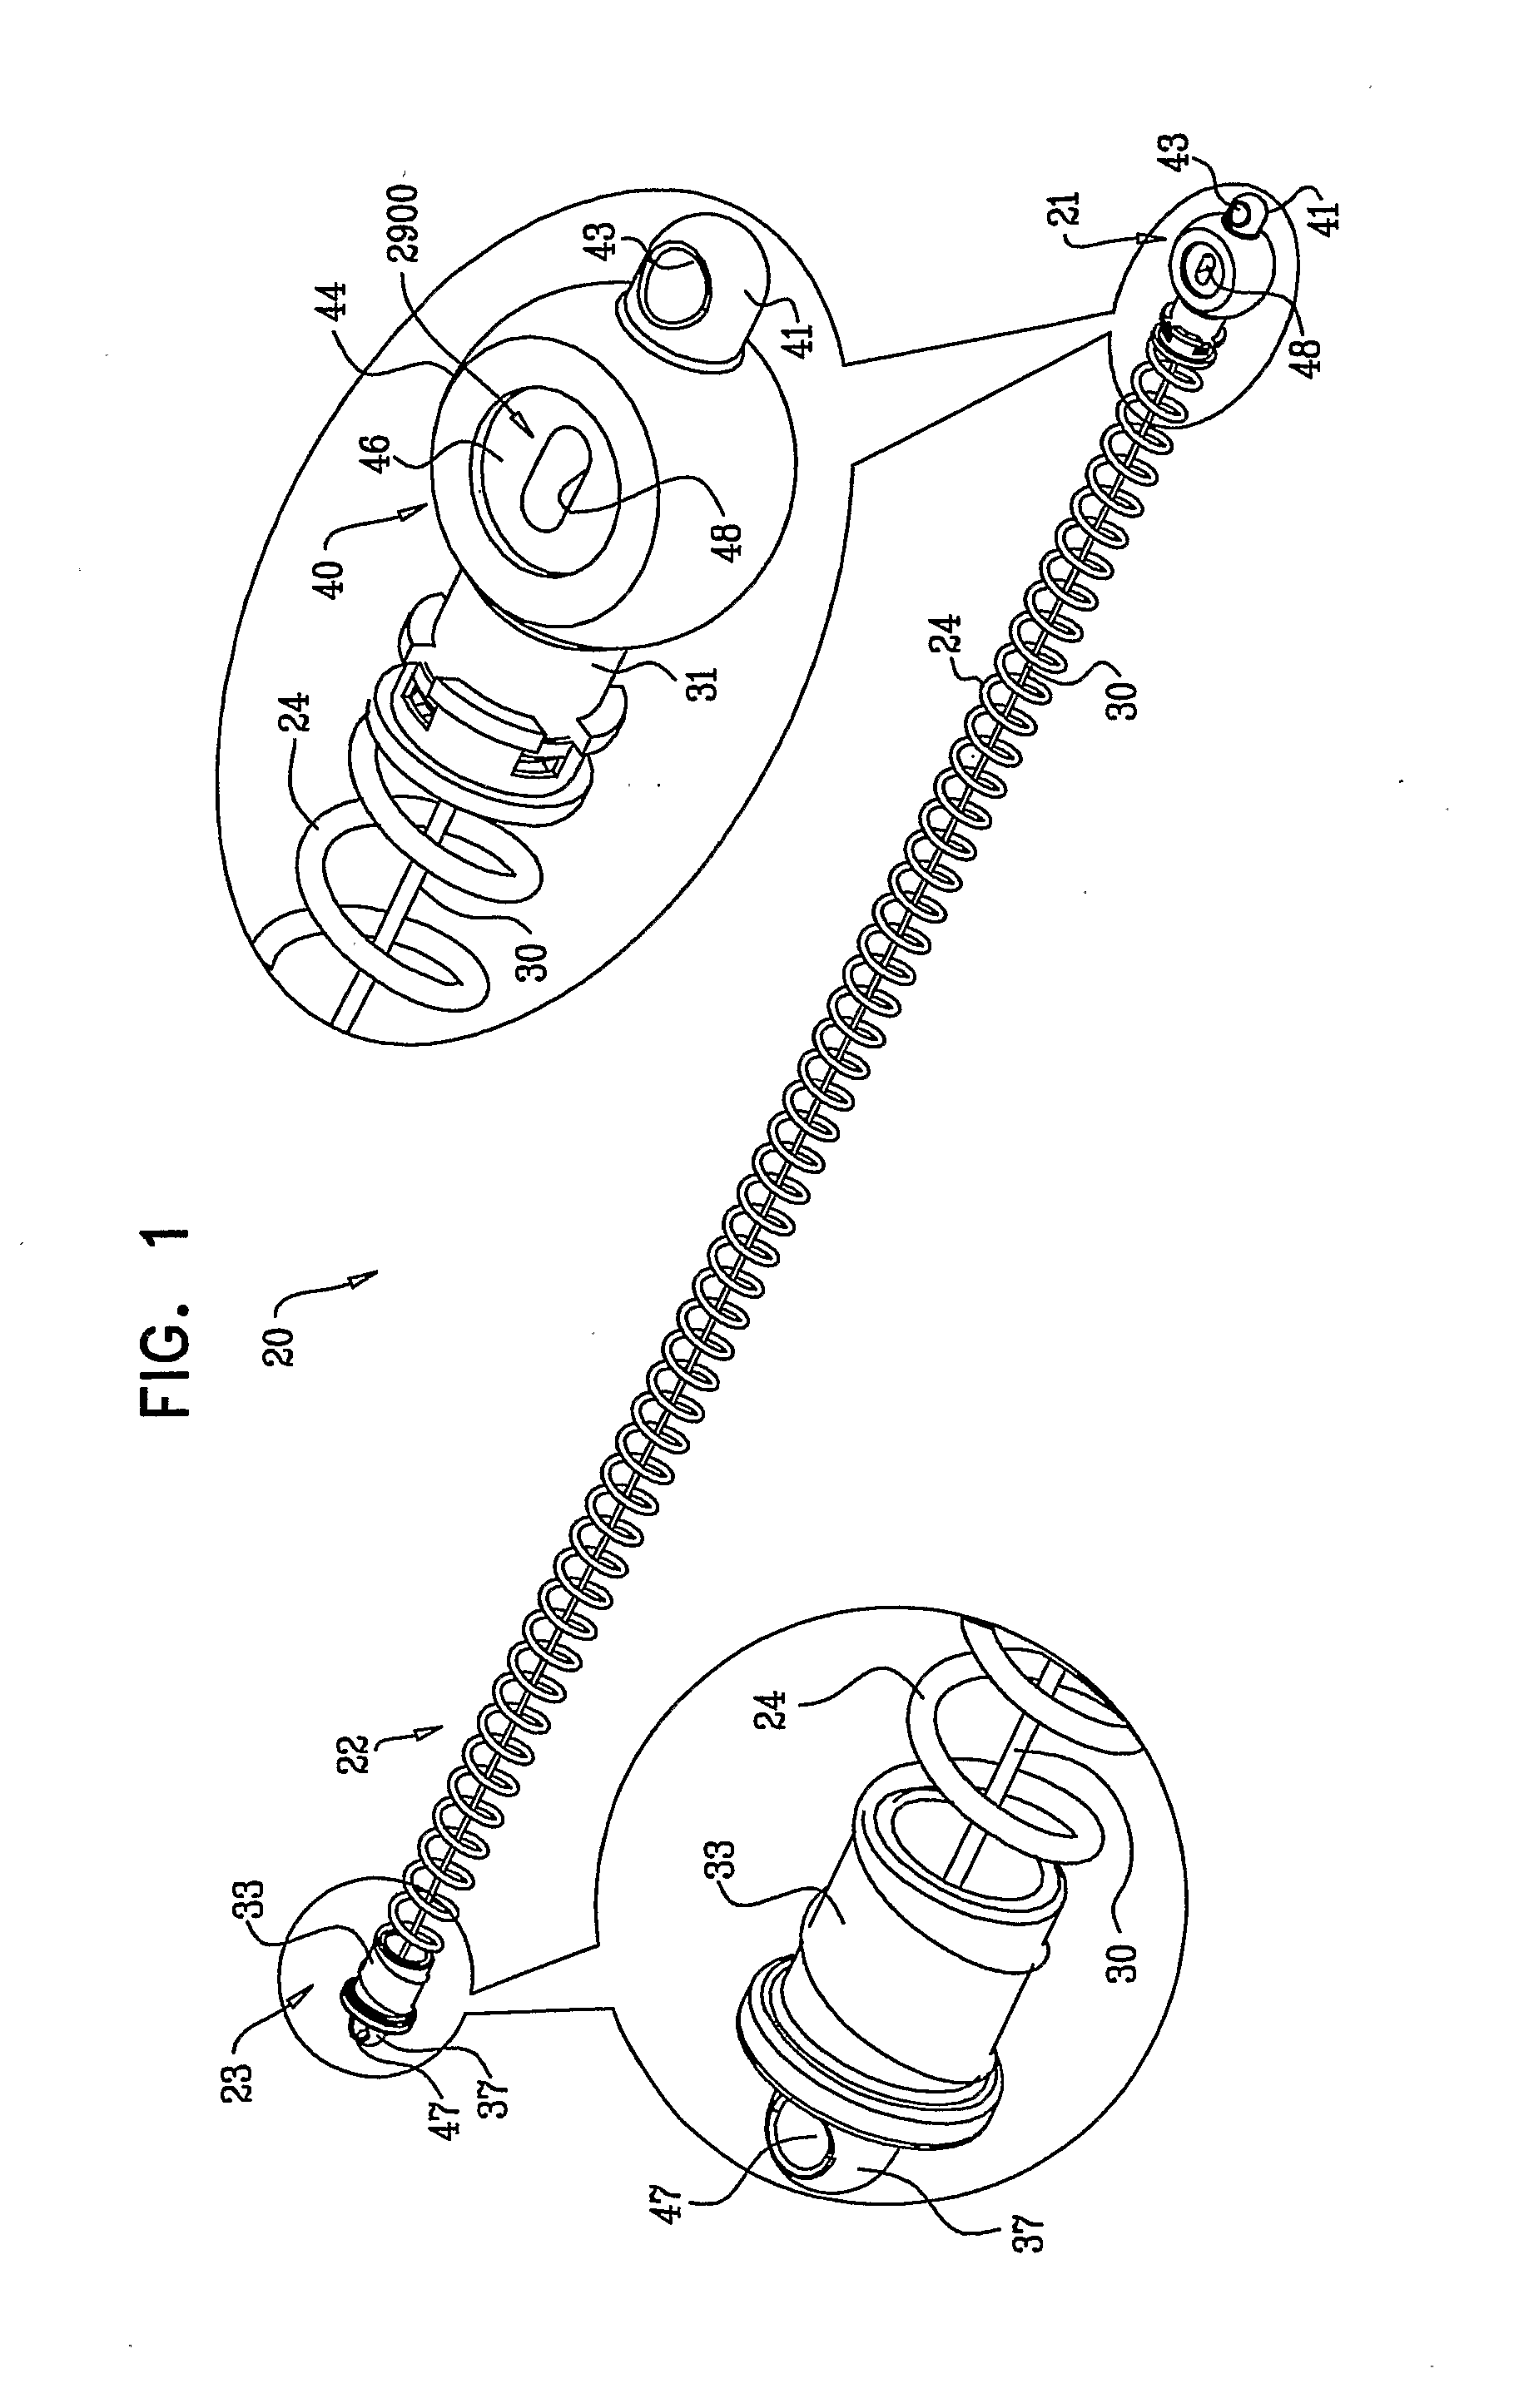 Adjustable annuloplasty devices and adjustment mechanisms therefor